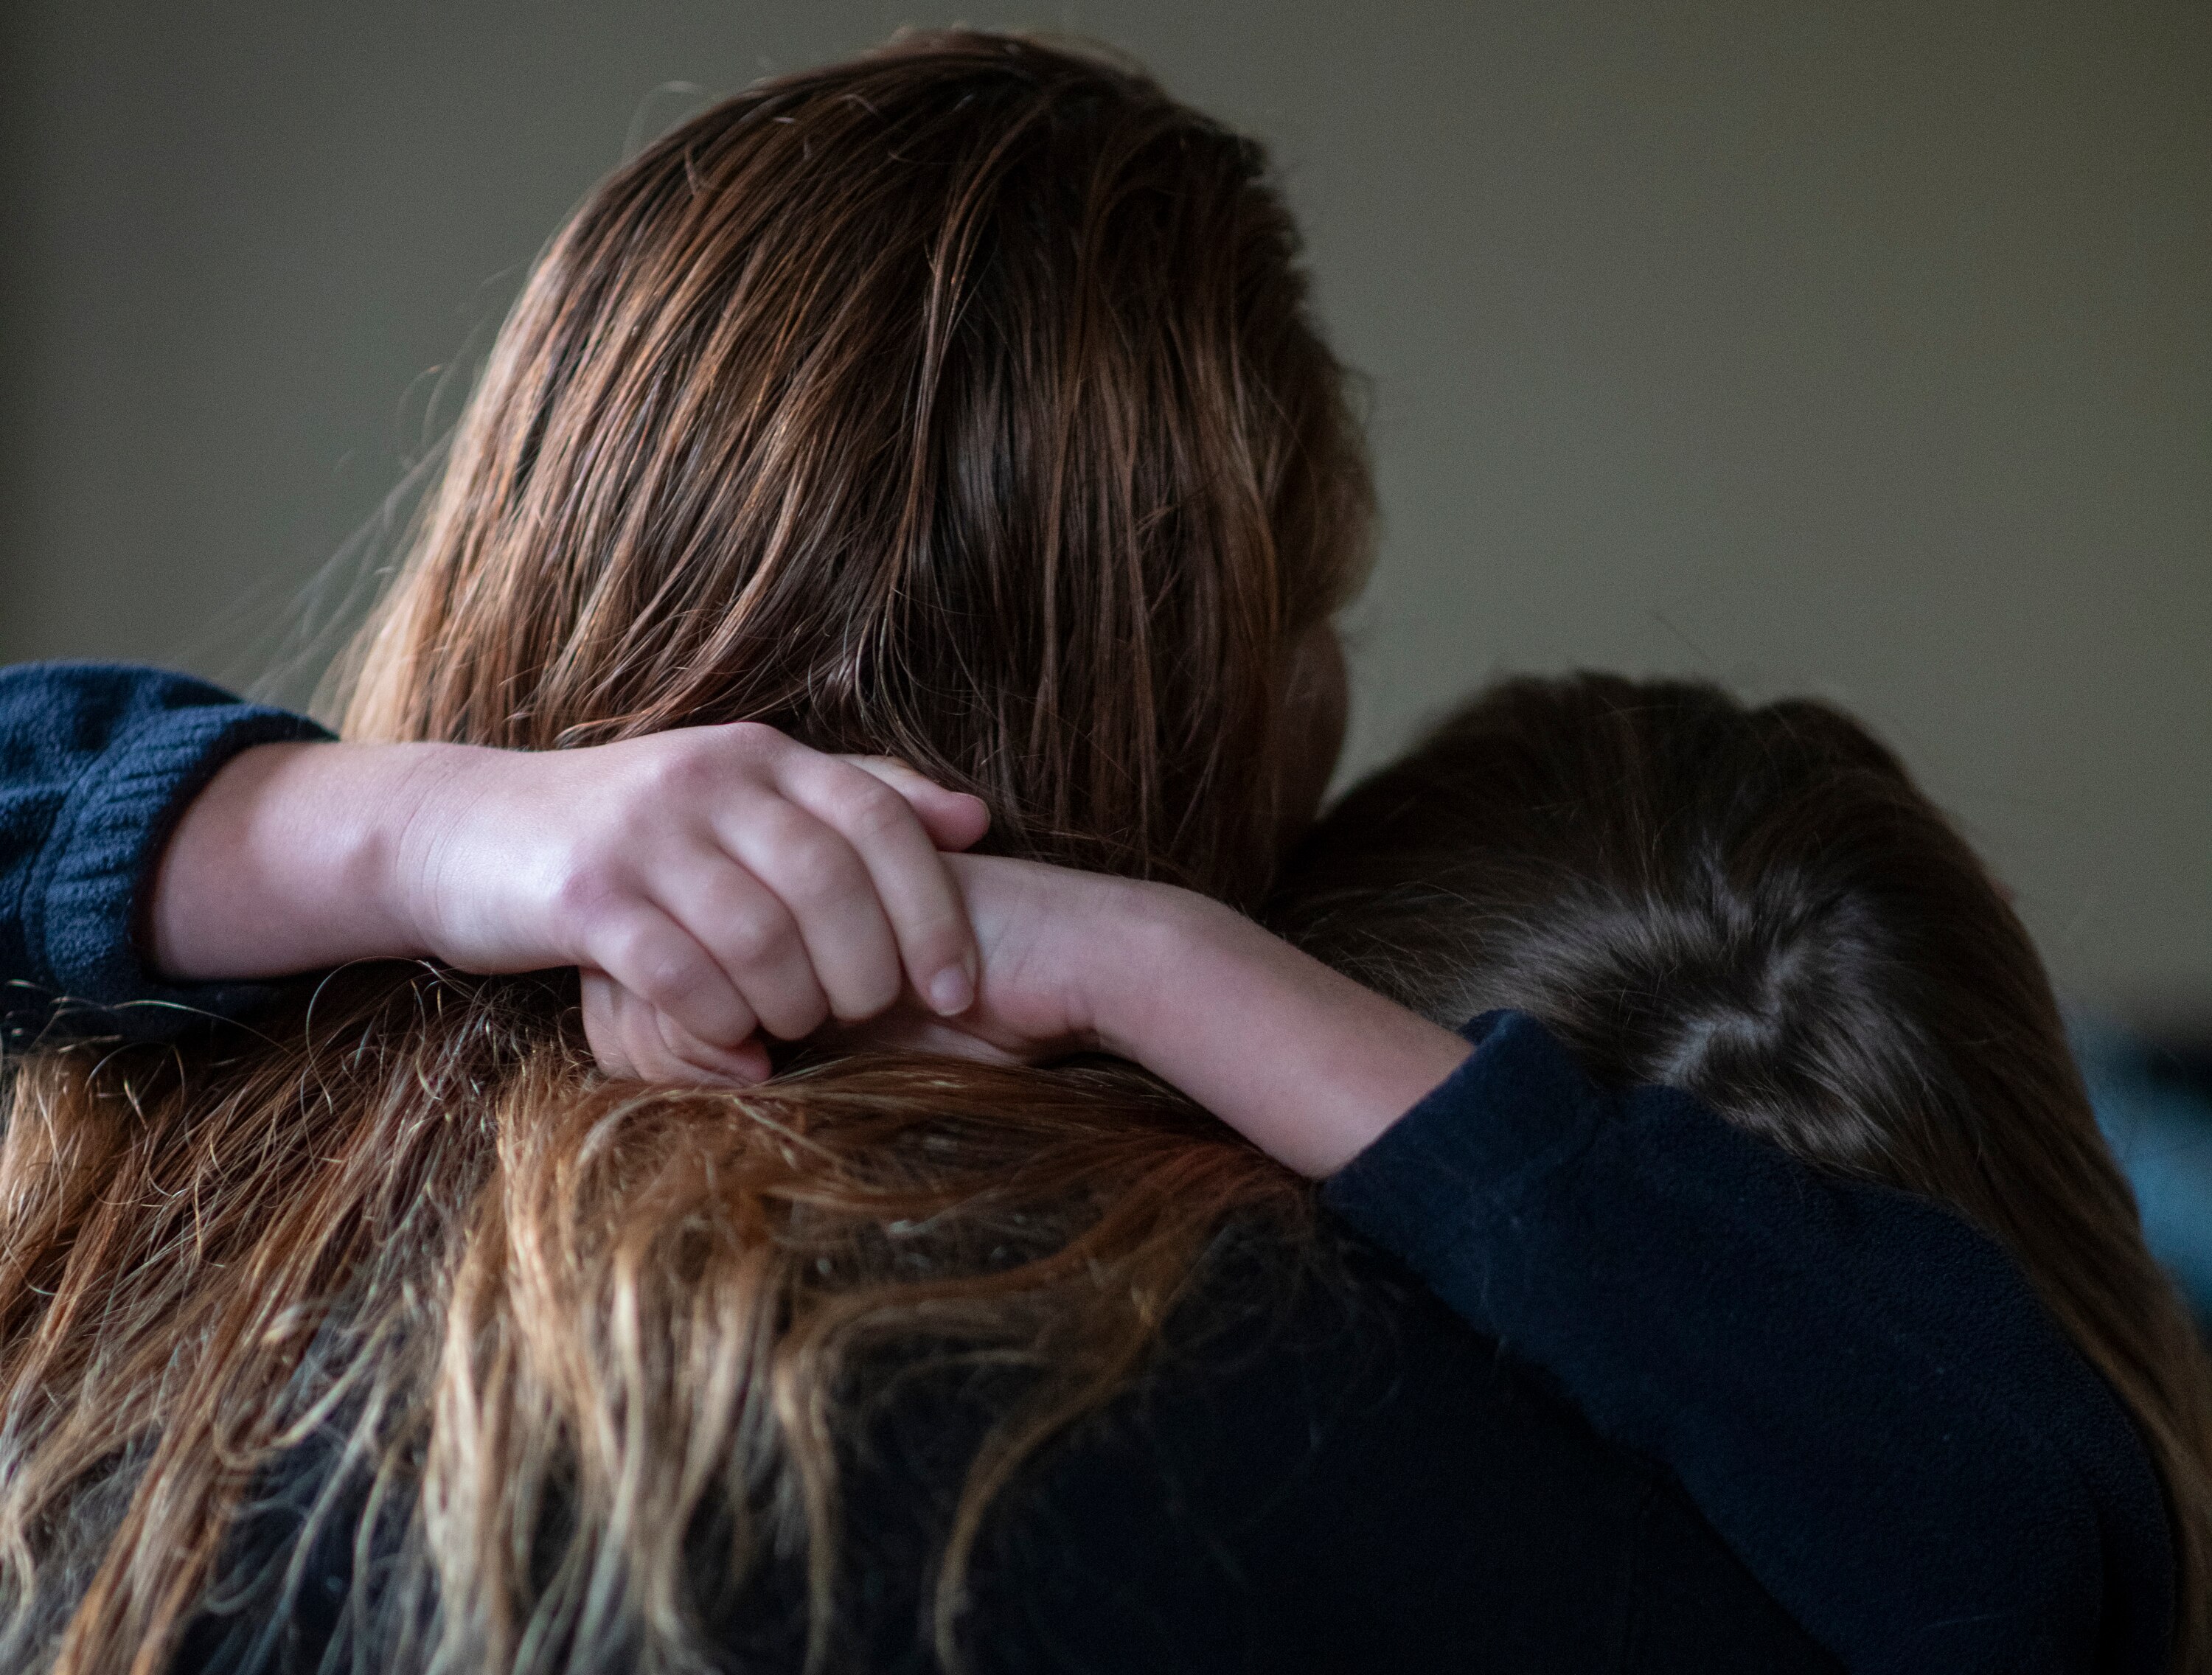 A young girl's hands clasp around her mum's shoulders during an embrace.